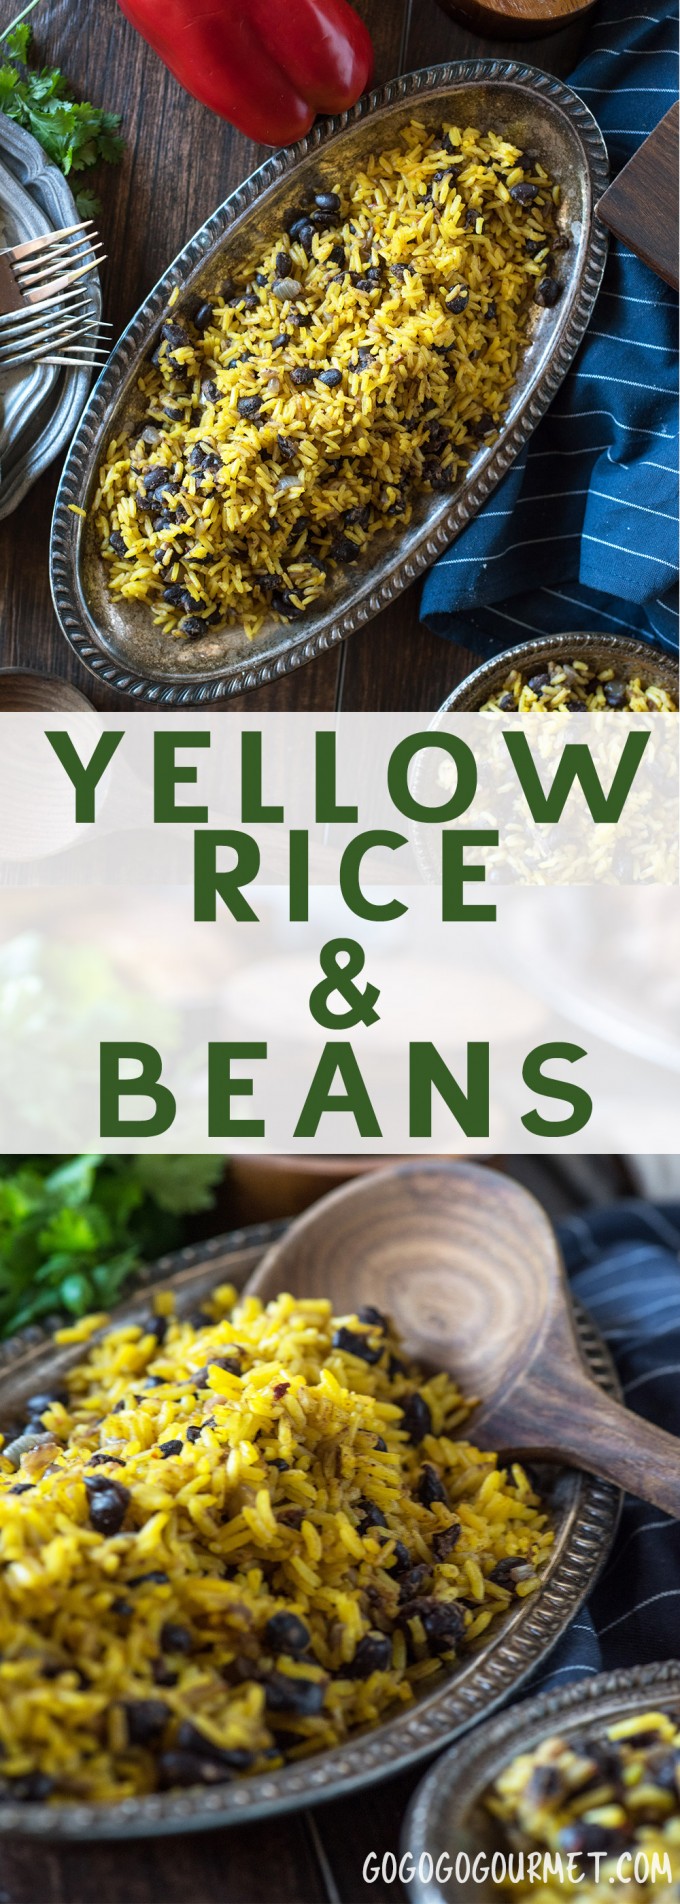 This authentic Yellow Beans and Rice recipe is perfect for serving with Puerto Rican pork (pernil.) And they only require 5 ingredients! #gogogogourmet #yellowbeansandrice #puertoricanfood via @gogogogourmet